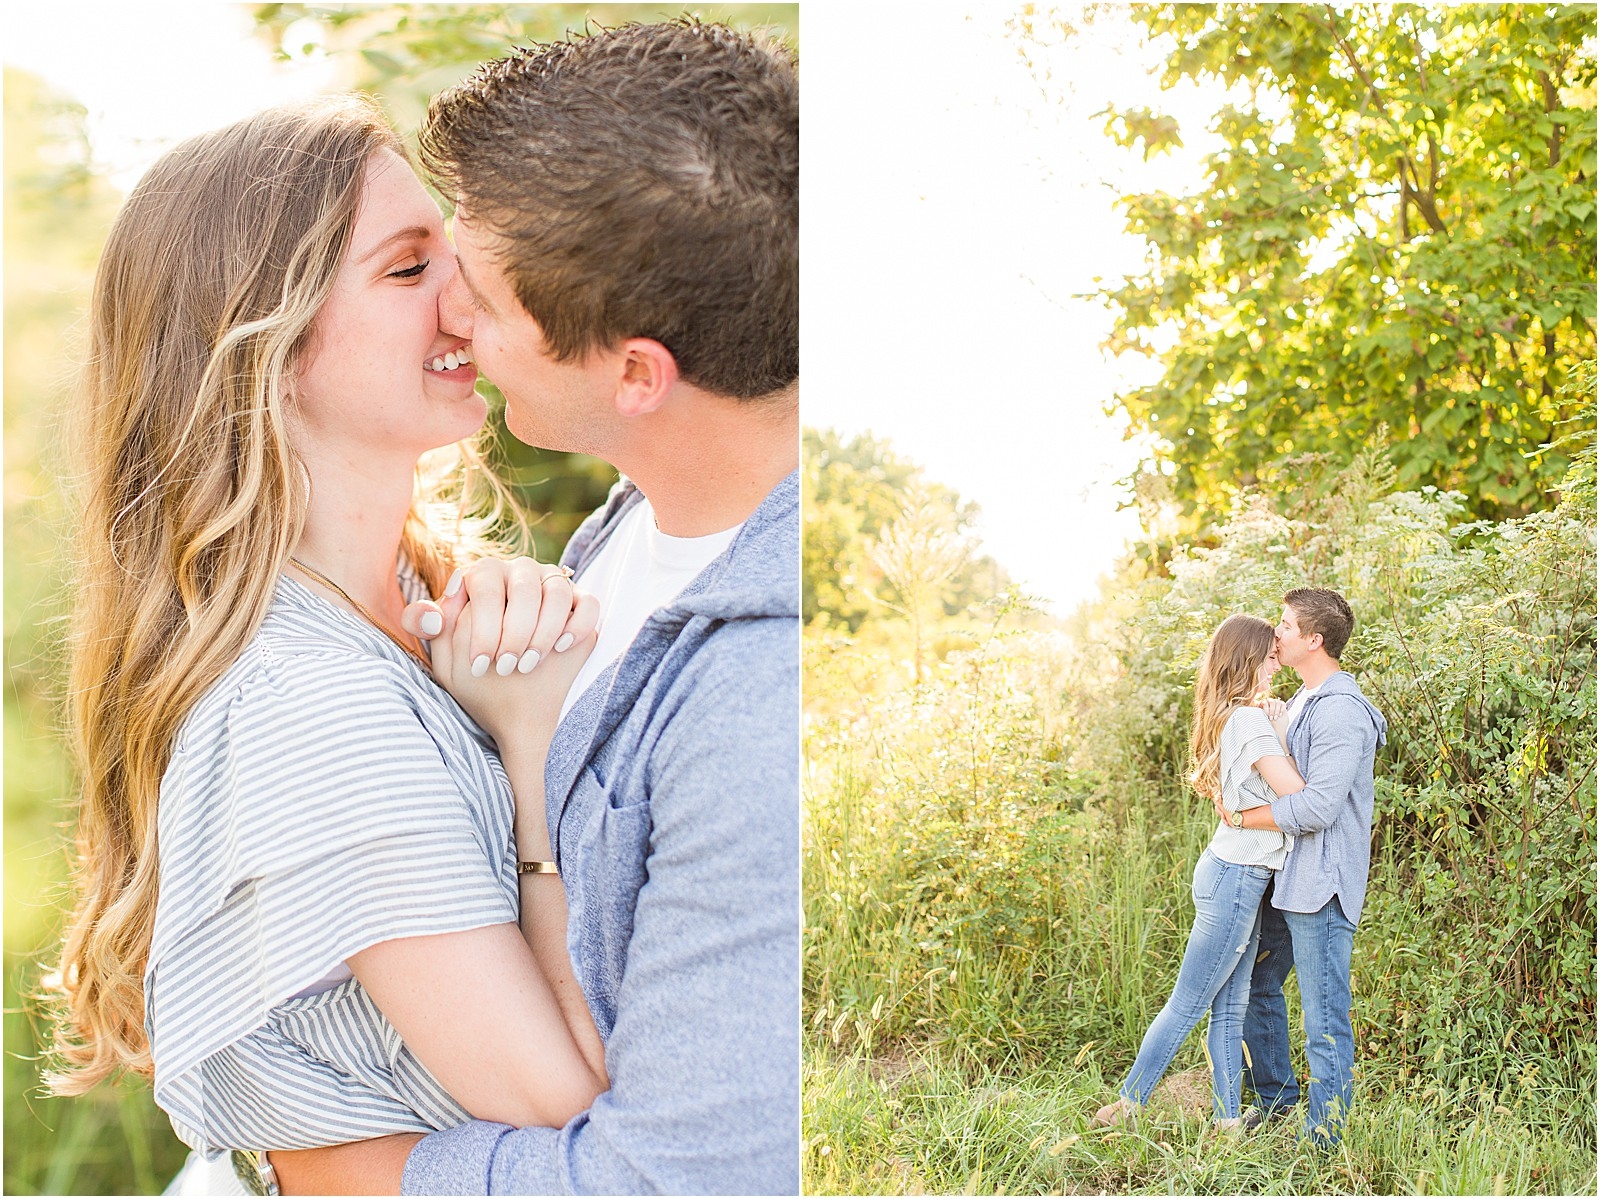 A Jasper Indiana Engagement Session | Tori and Kyle | Bret and Brandie Photography002.jpg